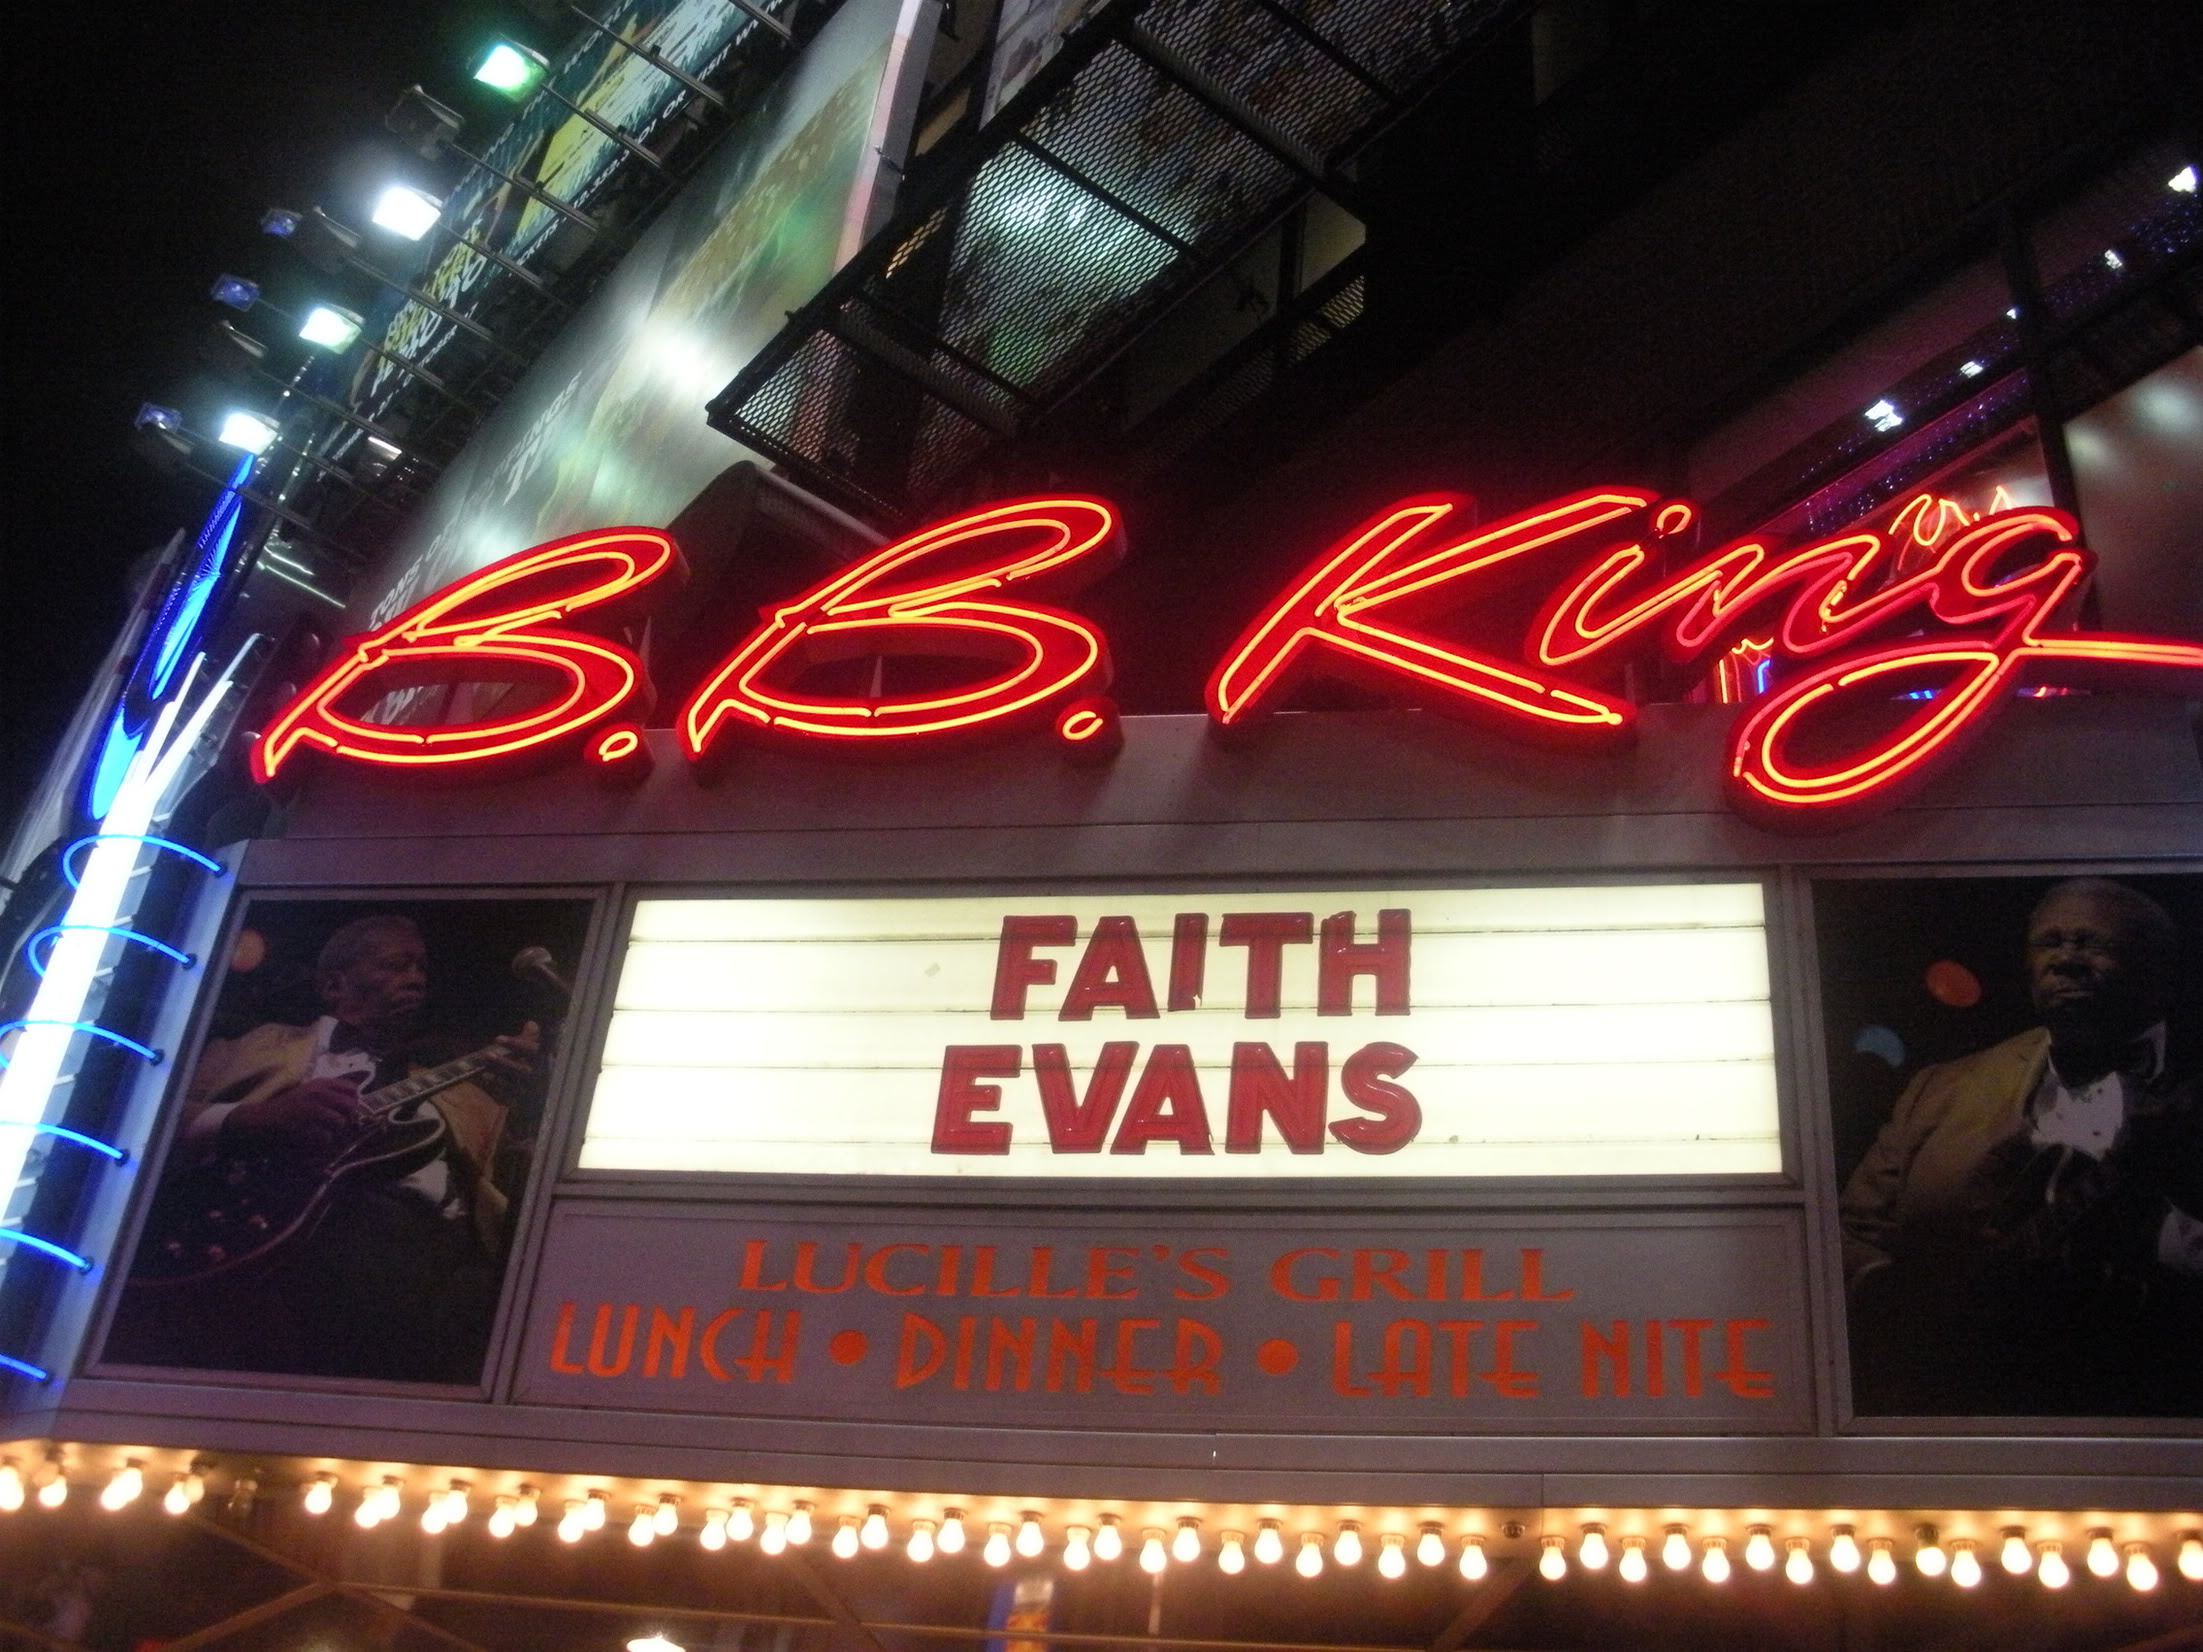 Faith Evans Live Concert Footage at B.B. Kings 10/5/10 (Part 2 of 3)